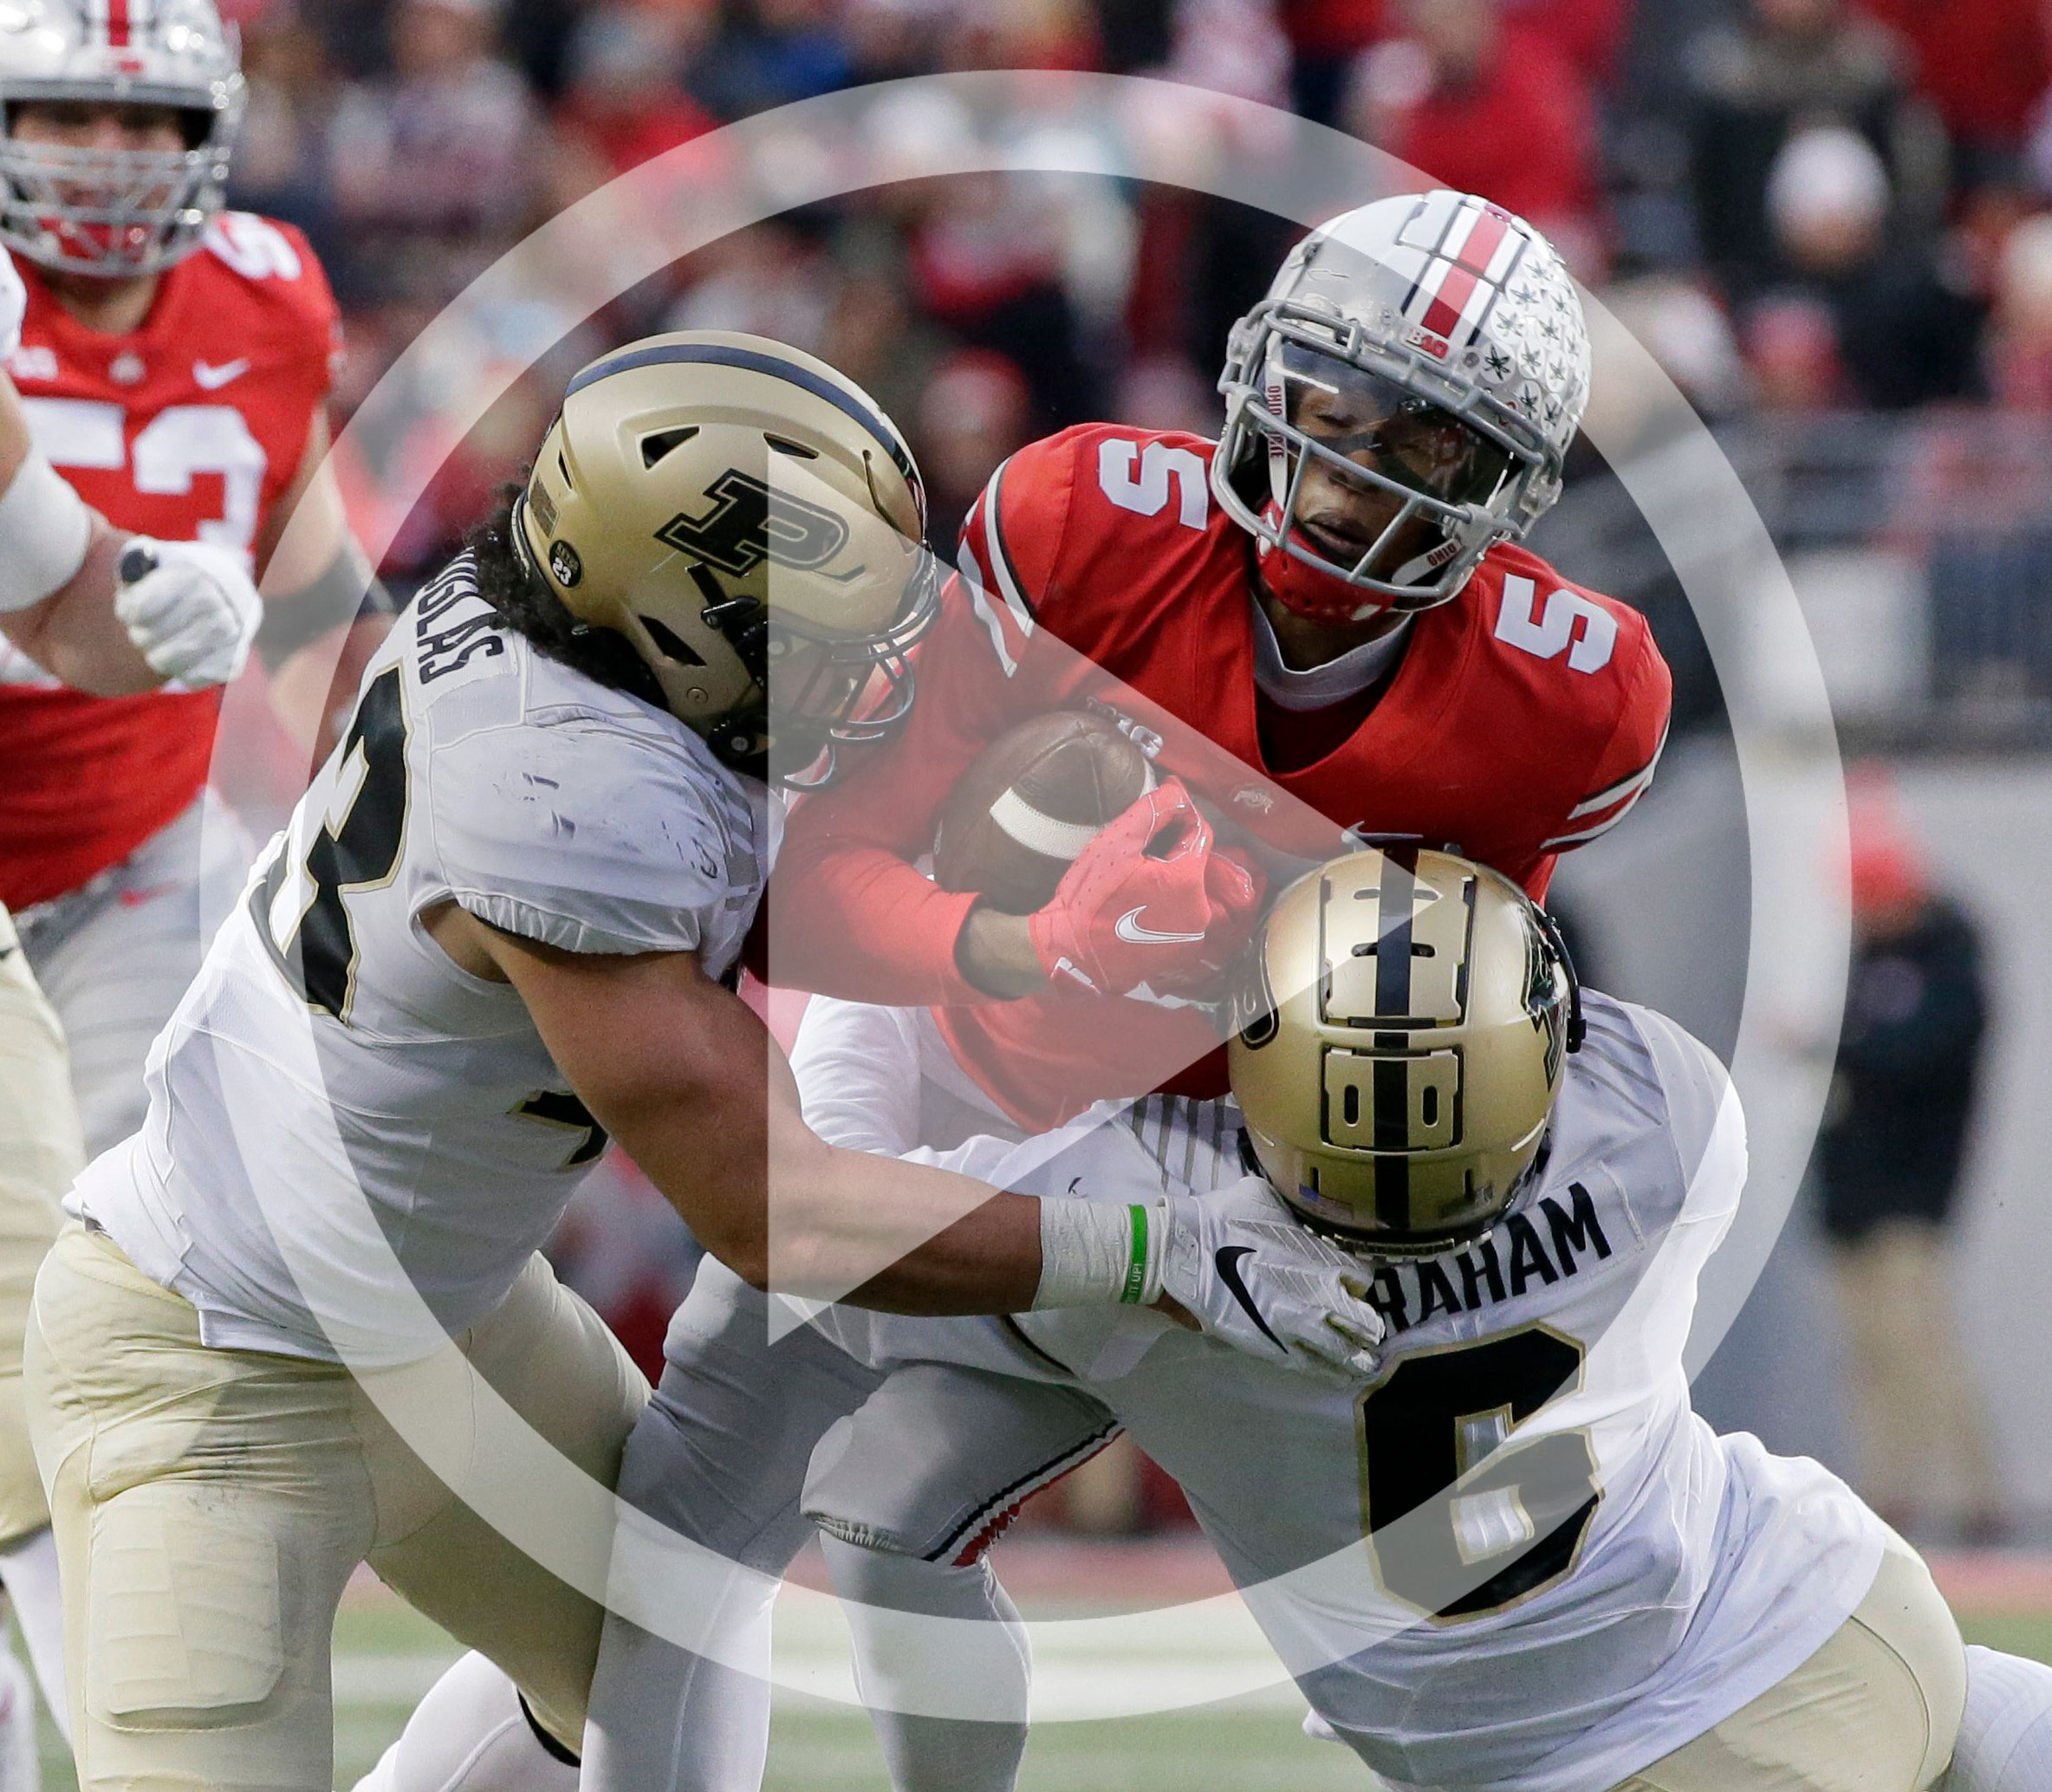 Where Ohio State stands after its rout of Purdue